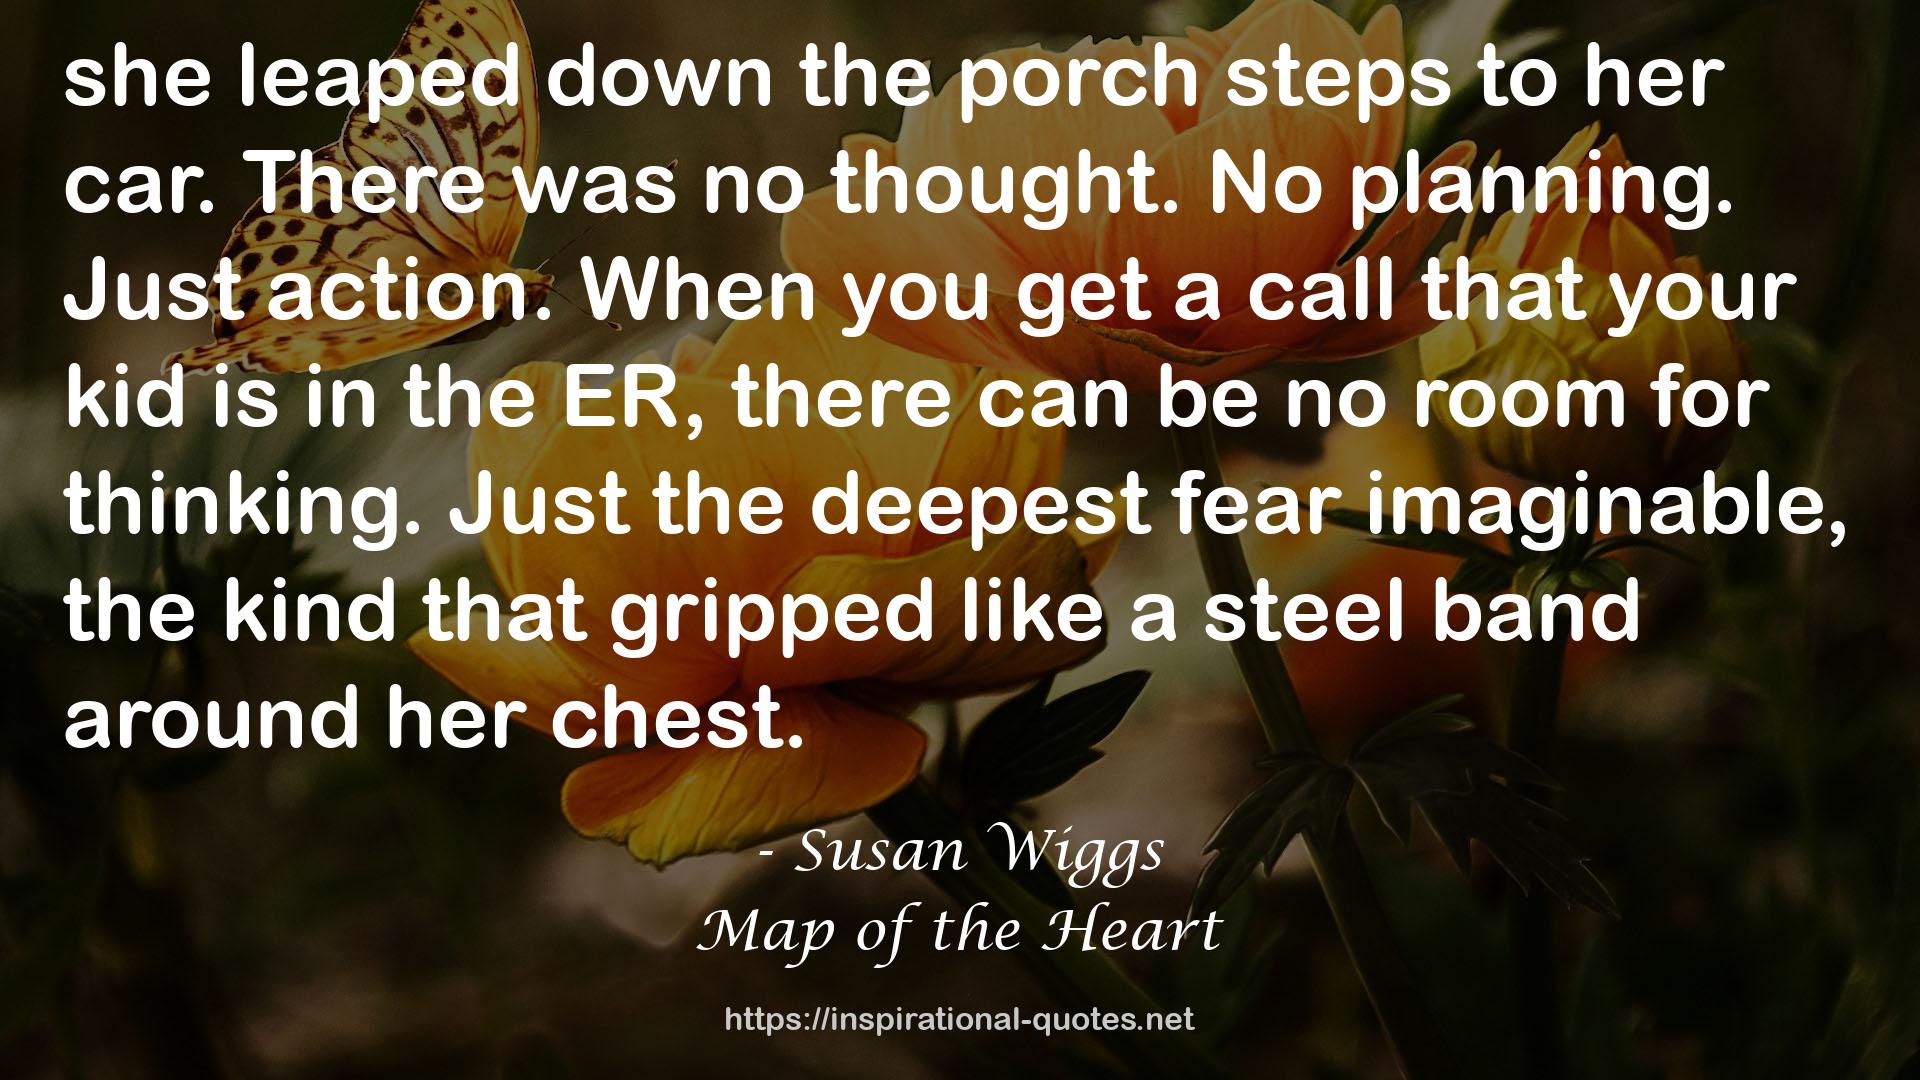 Map of the Heart QUOTES